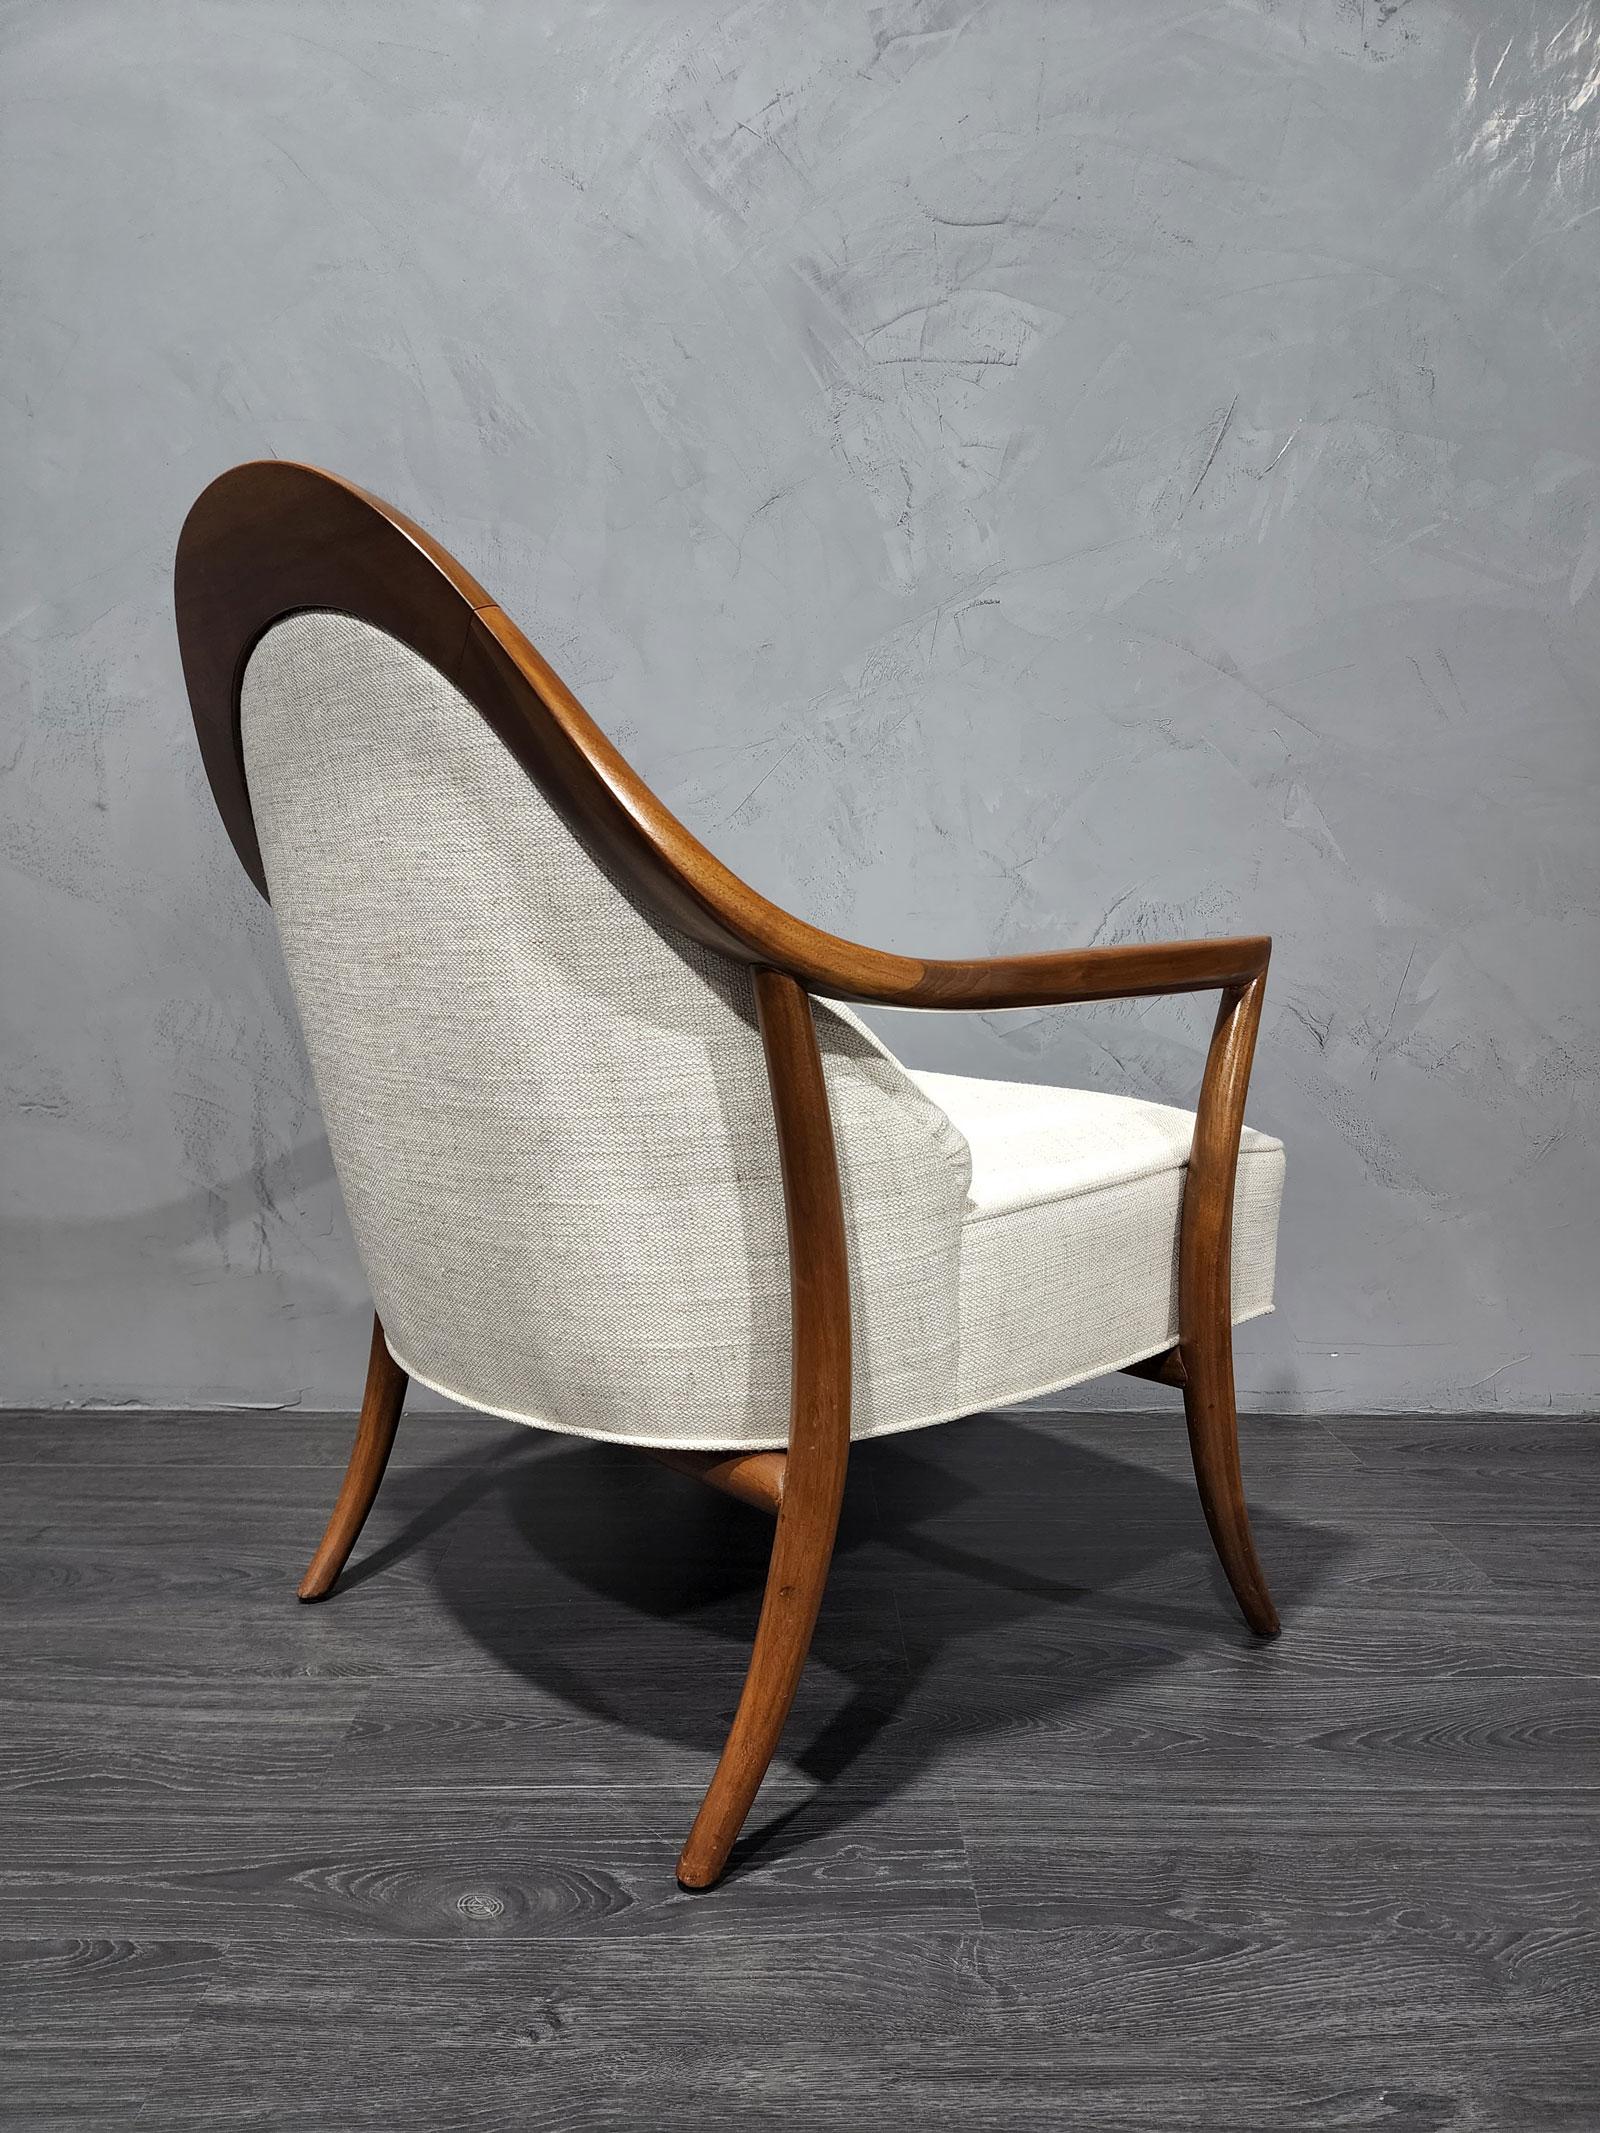 Graceful and comfortable lounge chair by T.H. Robsjohn-Gibbings. We have reupholstered in a high-quality neutral fabric.